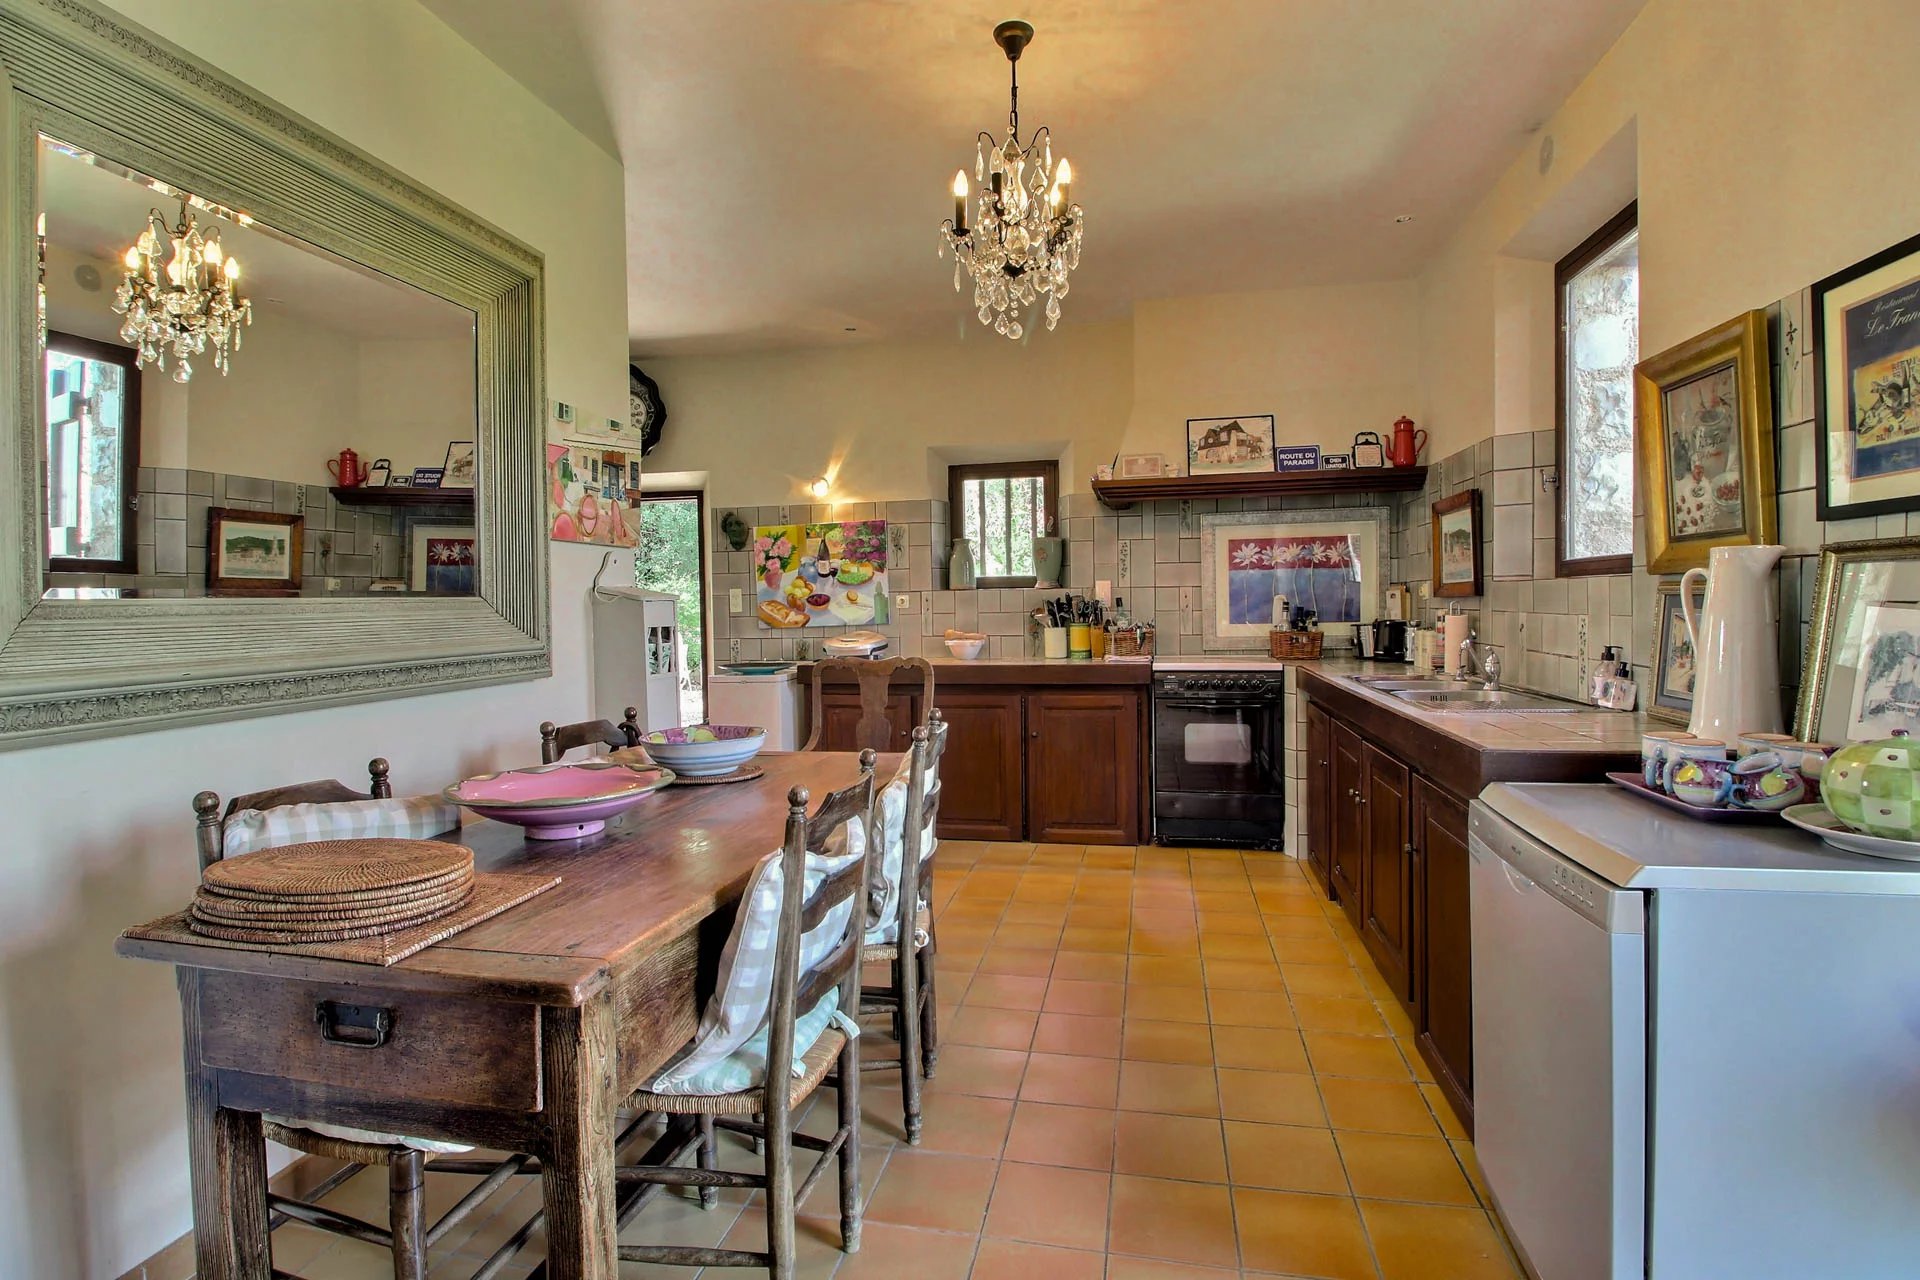 Villa with view, walking distance to the villages - Tourrettes